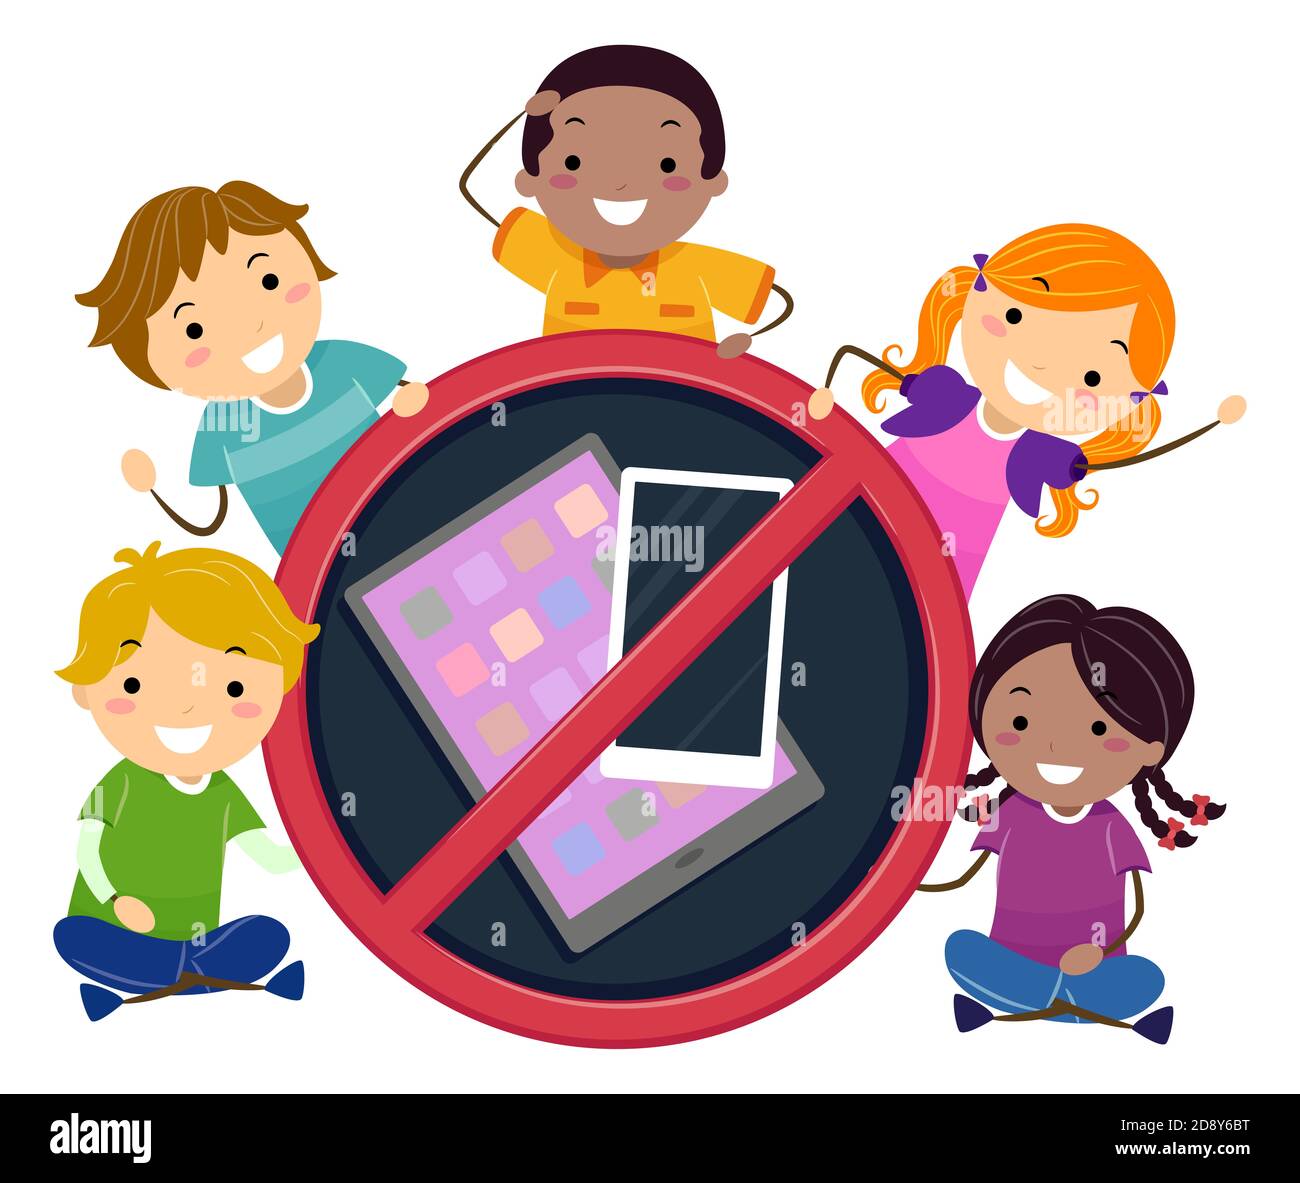 Illustration of Stickman Kids Holding No Sign with Computer Tablet and Mobile Phone. No Screen Time Stock Photo